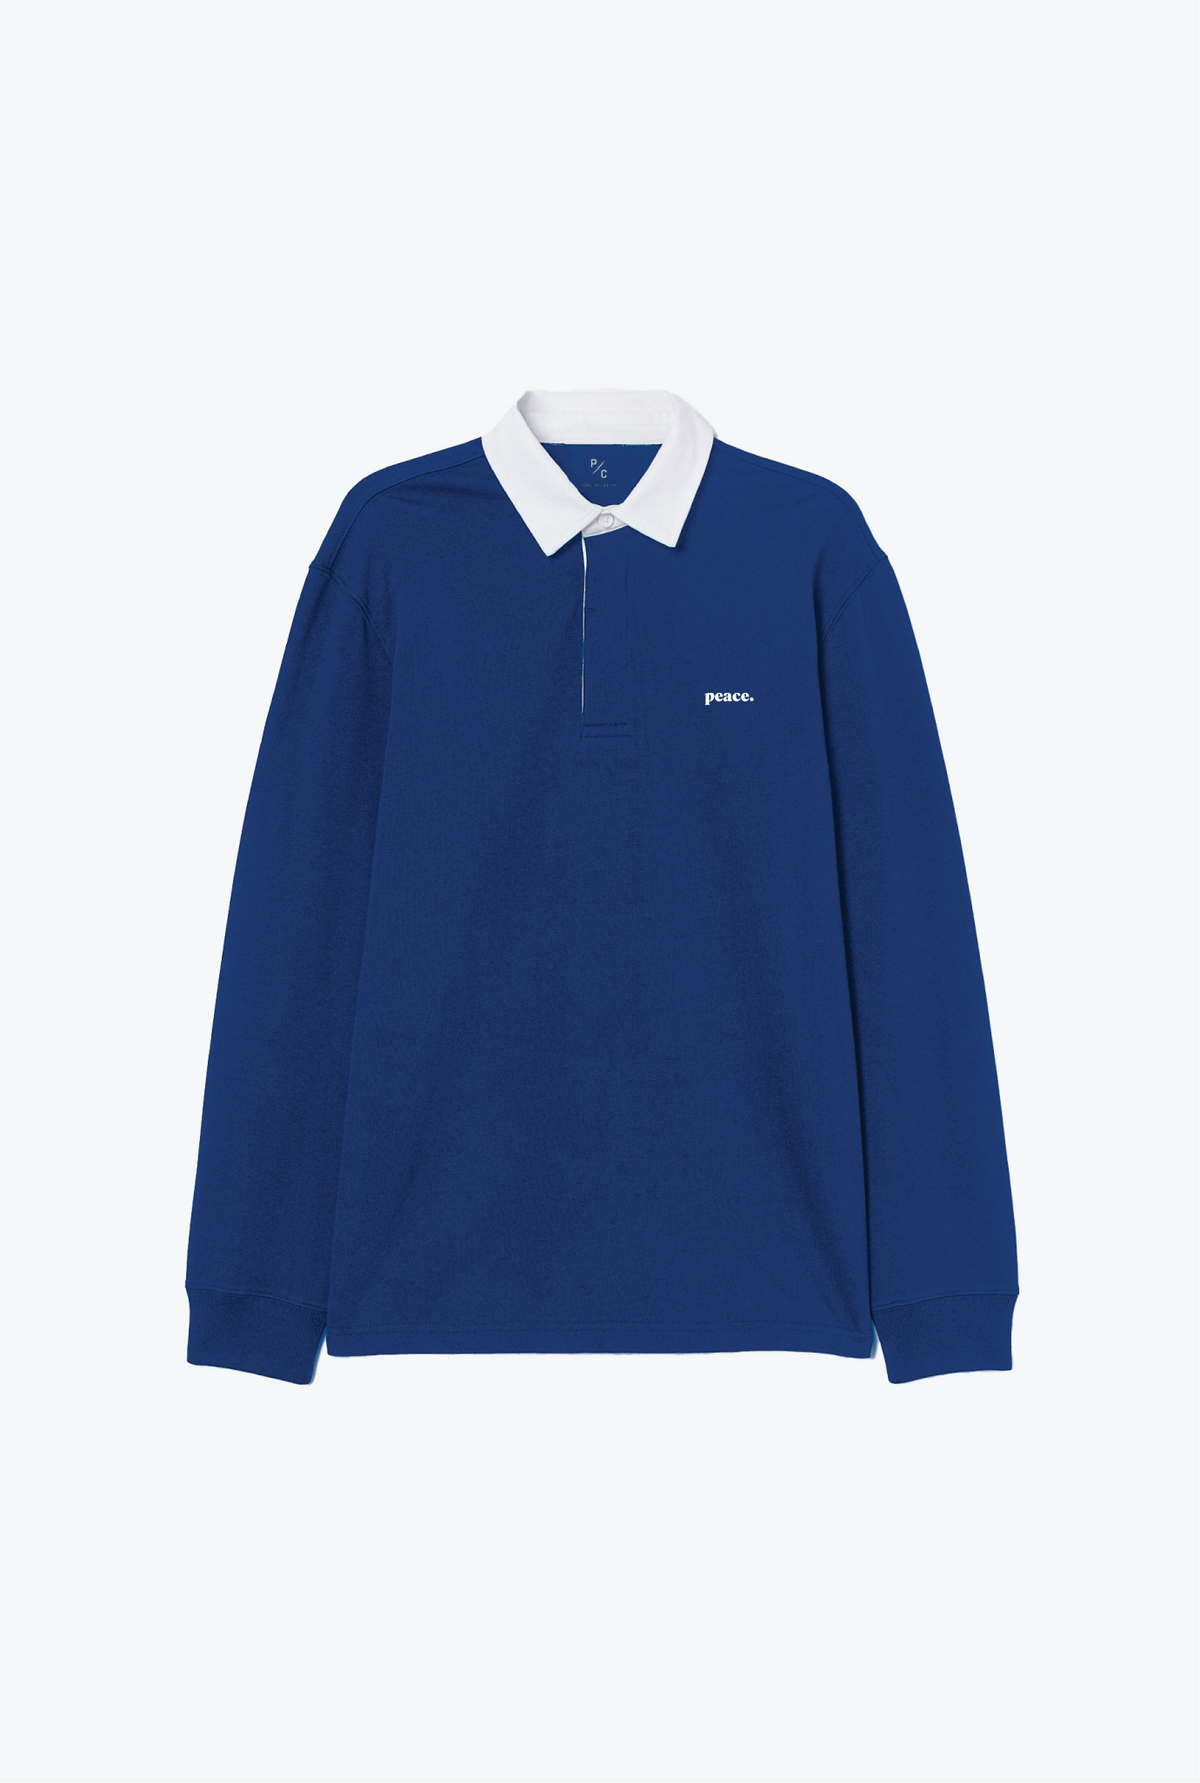 Peace Oversized Rugby - Royal